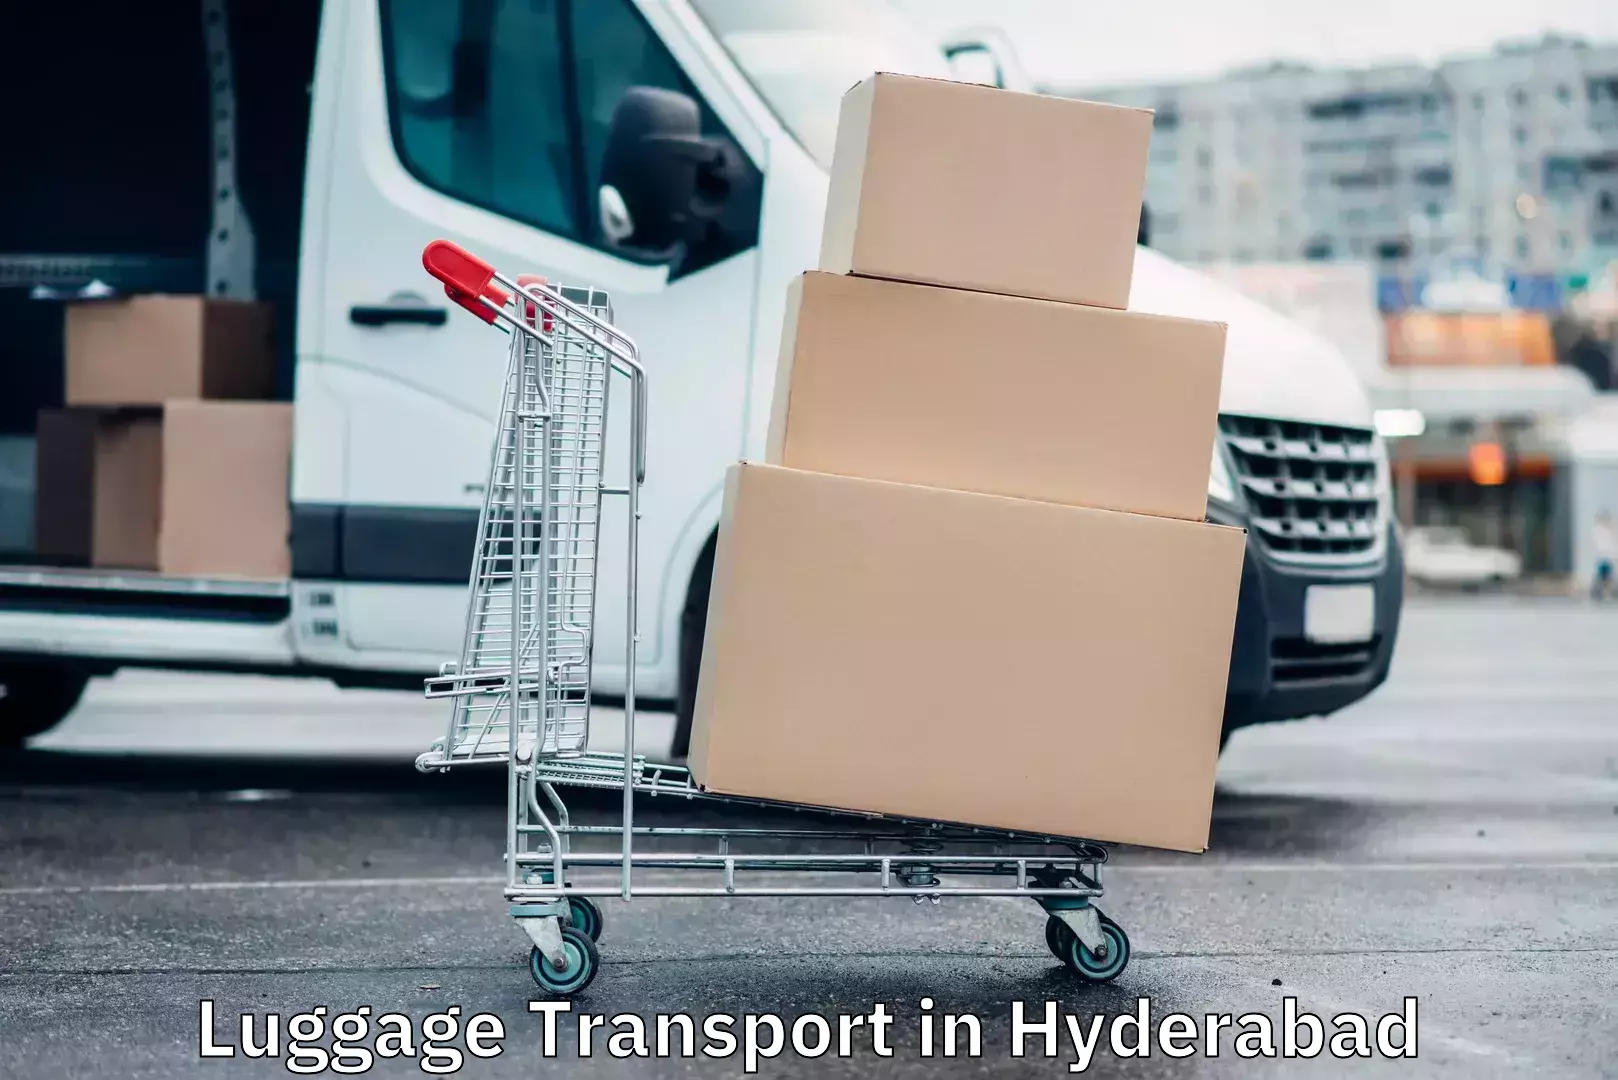 Online luggage shipping in Hyderabad